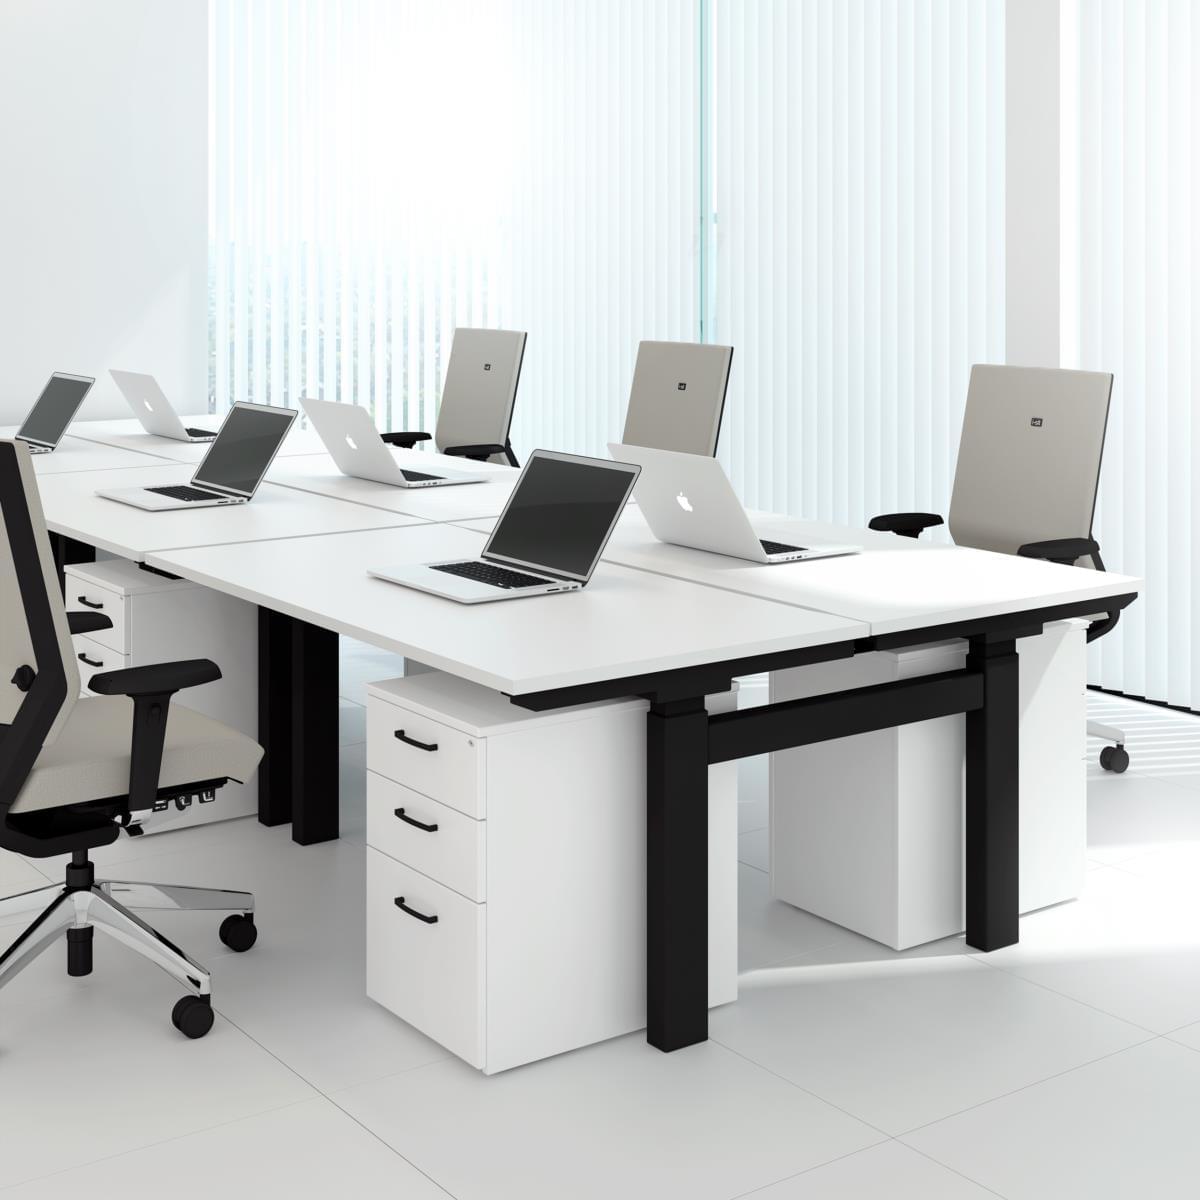 white Height Adjustable Desks with grey office chairs